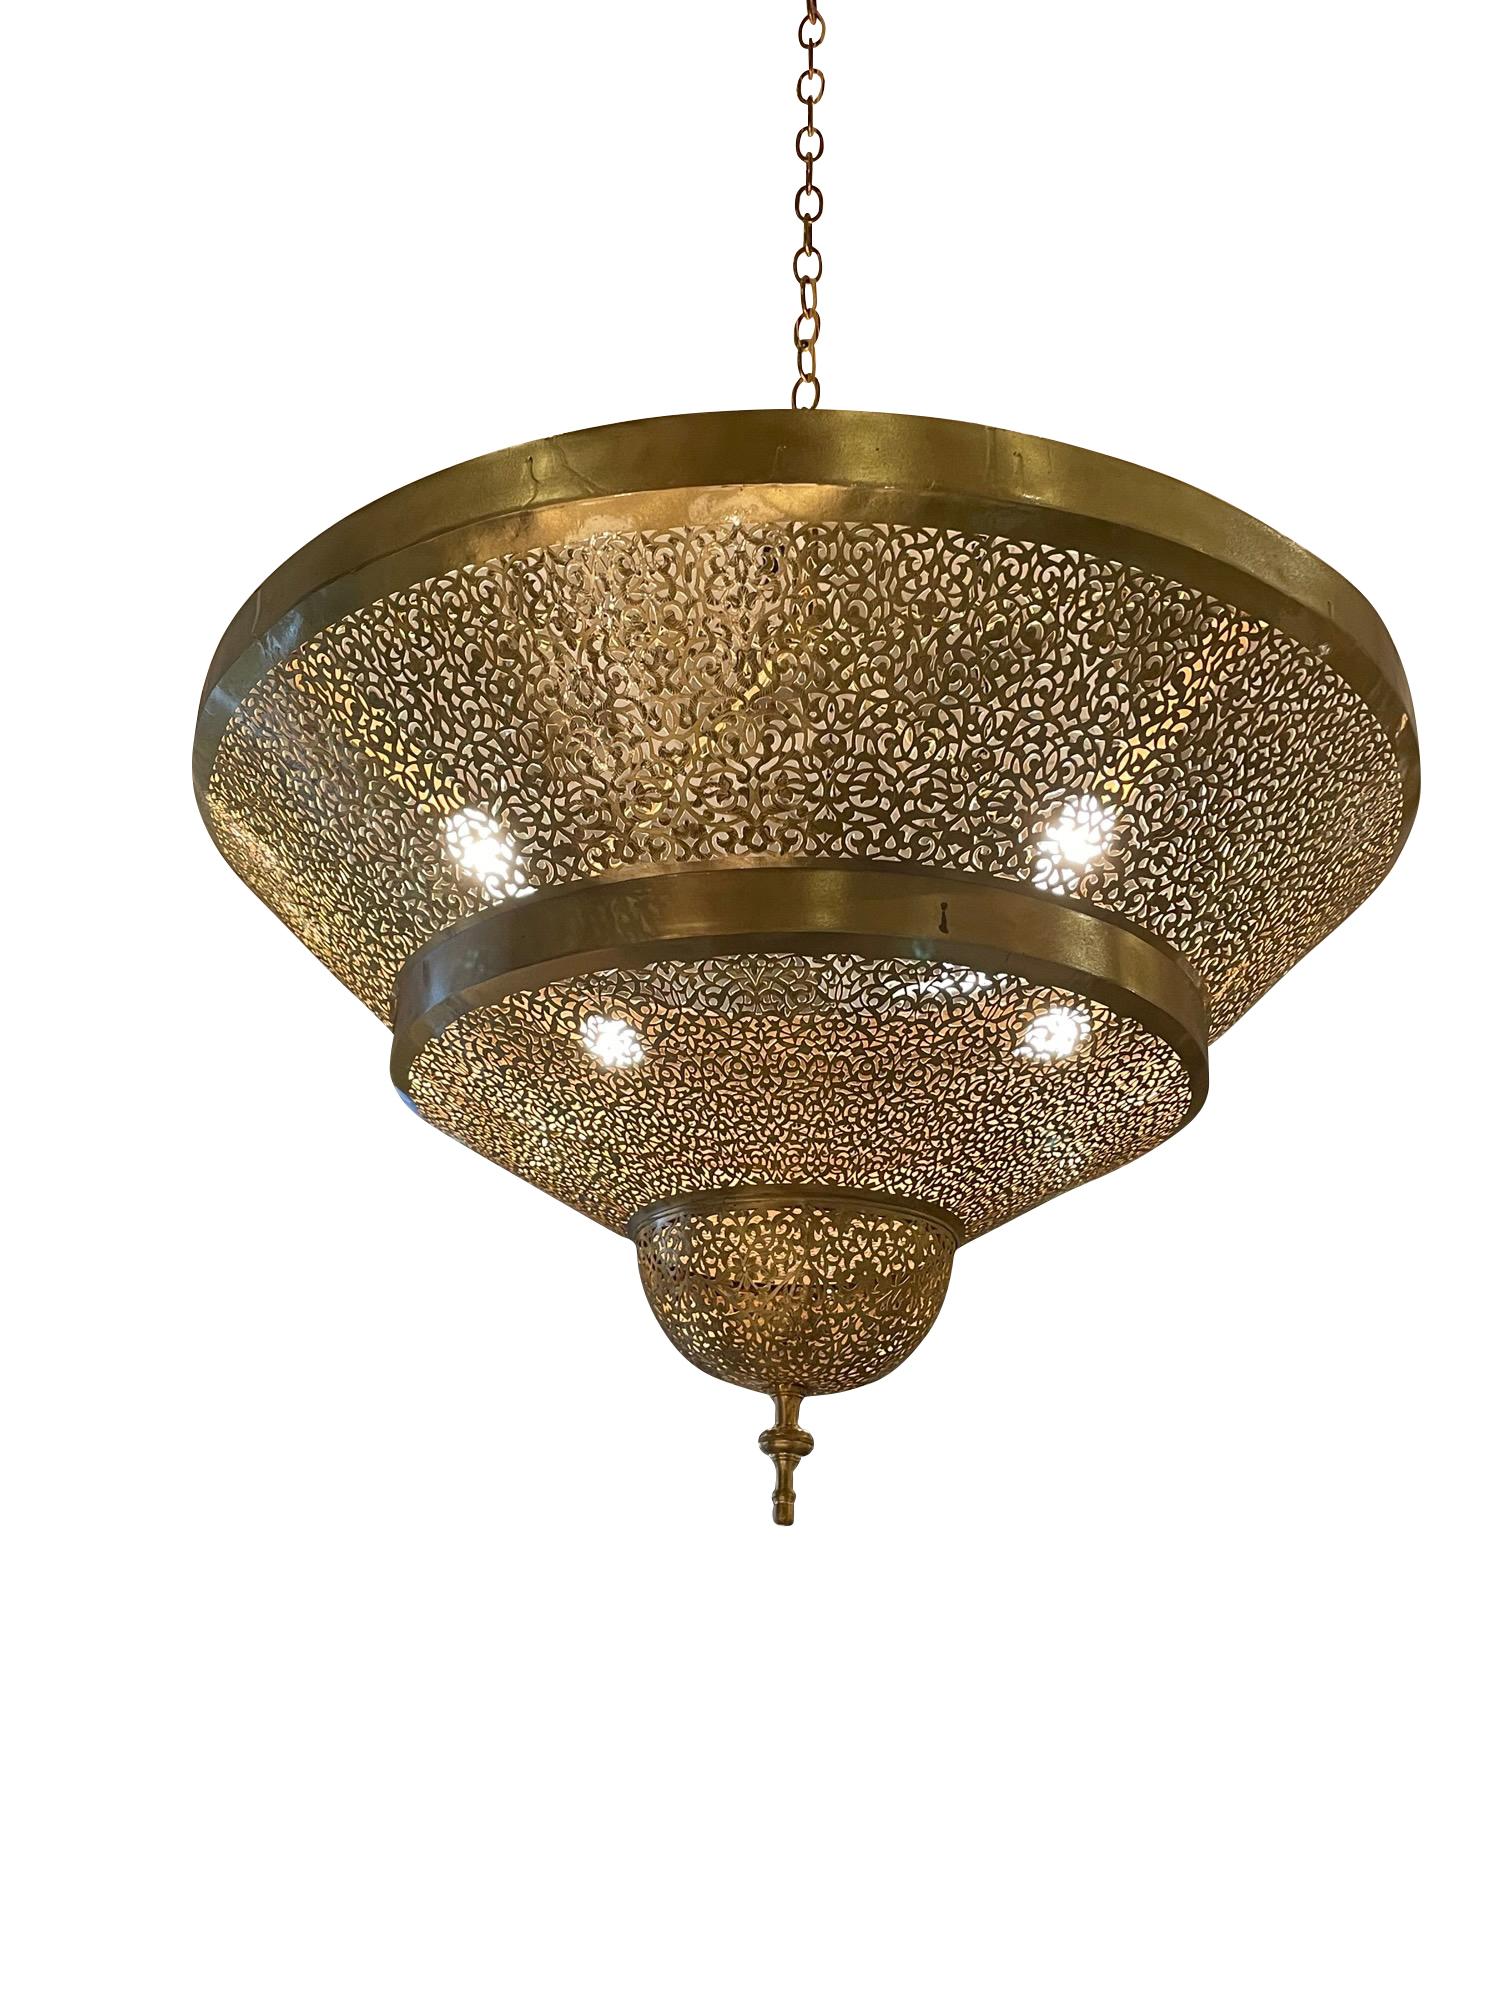 Contemporary Moroccan three tiered bronze chandelier.
Decorative perforated design.
Four candelabra bulbs.
Finial bottom.
Fixture OH 18